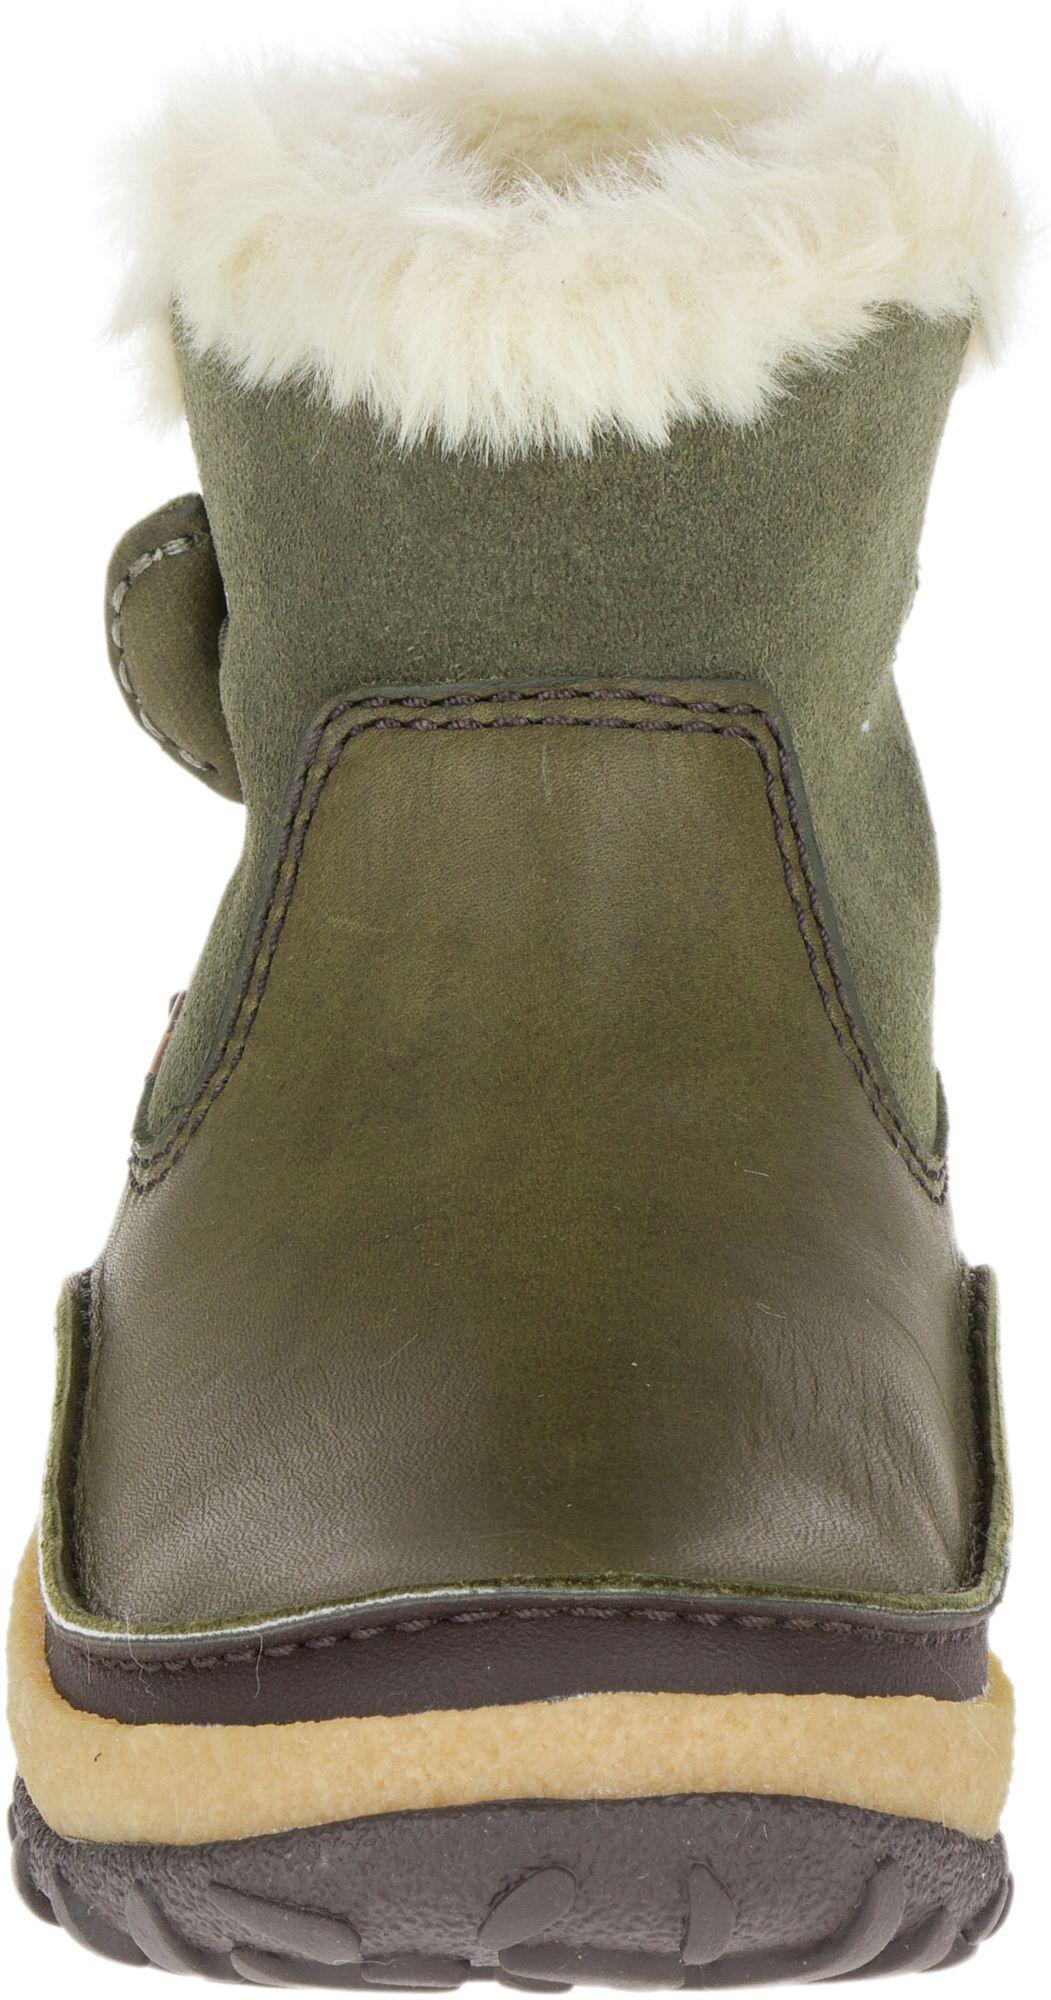 Tremblant On Polar Waterproof Snow Boot in Dusty Olive (Green) -